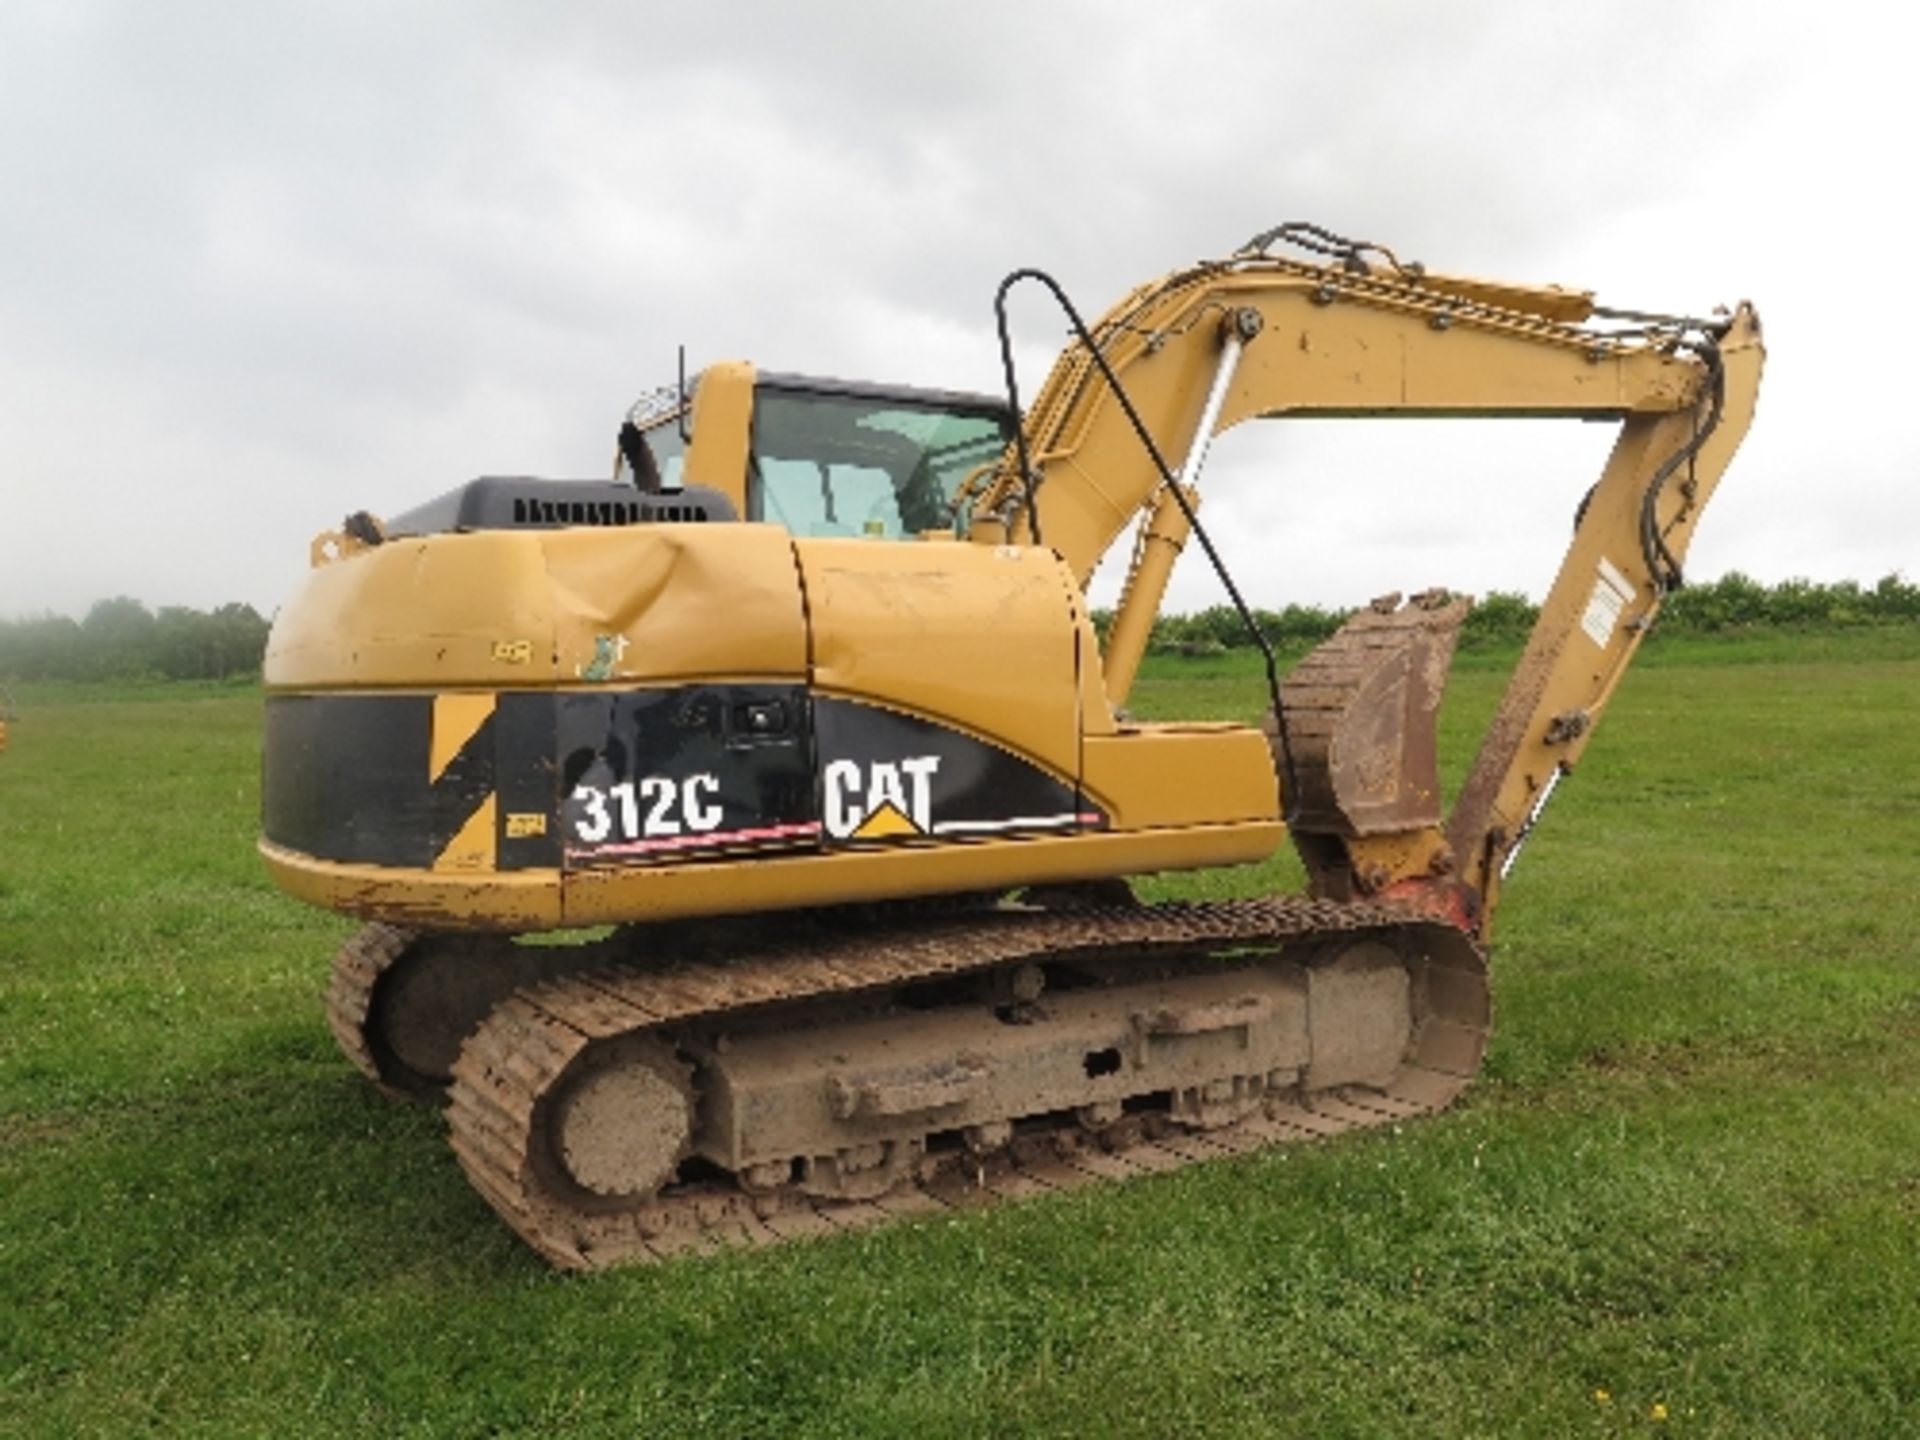 Caterpillar 312C excavator 4331 hrs 2006 145477
CANOPY DAMAGE
ONE SIDE POOR TRACKING FORWARD -